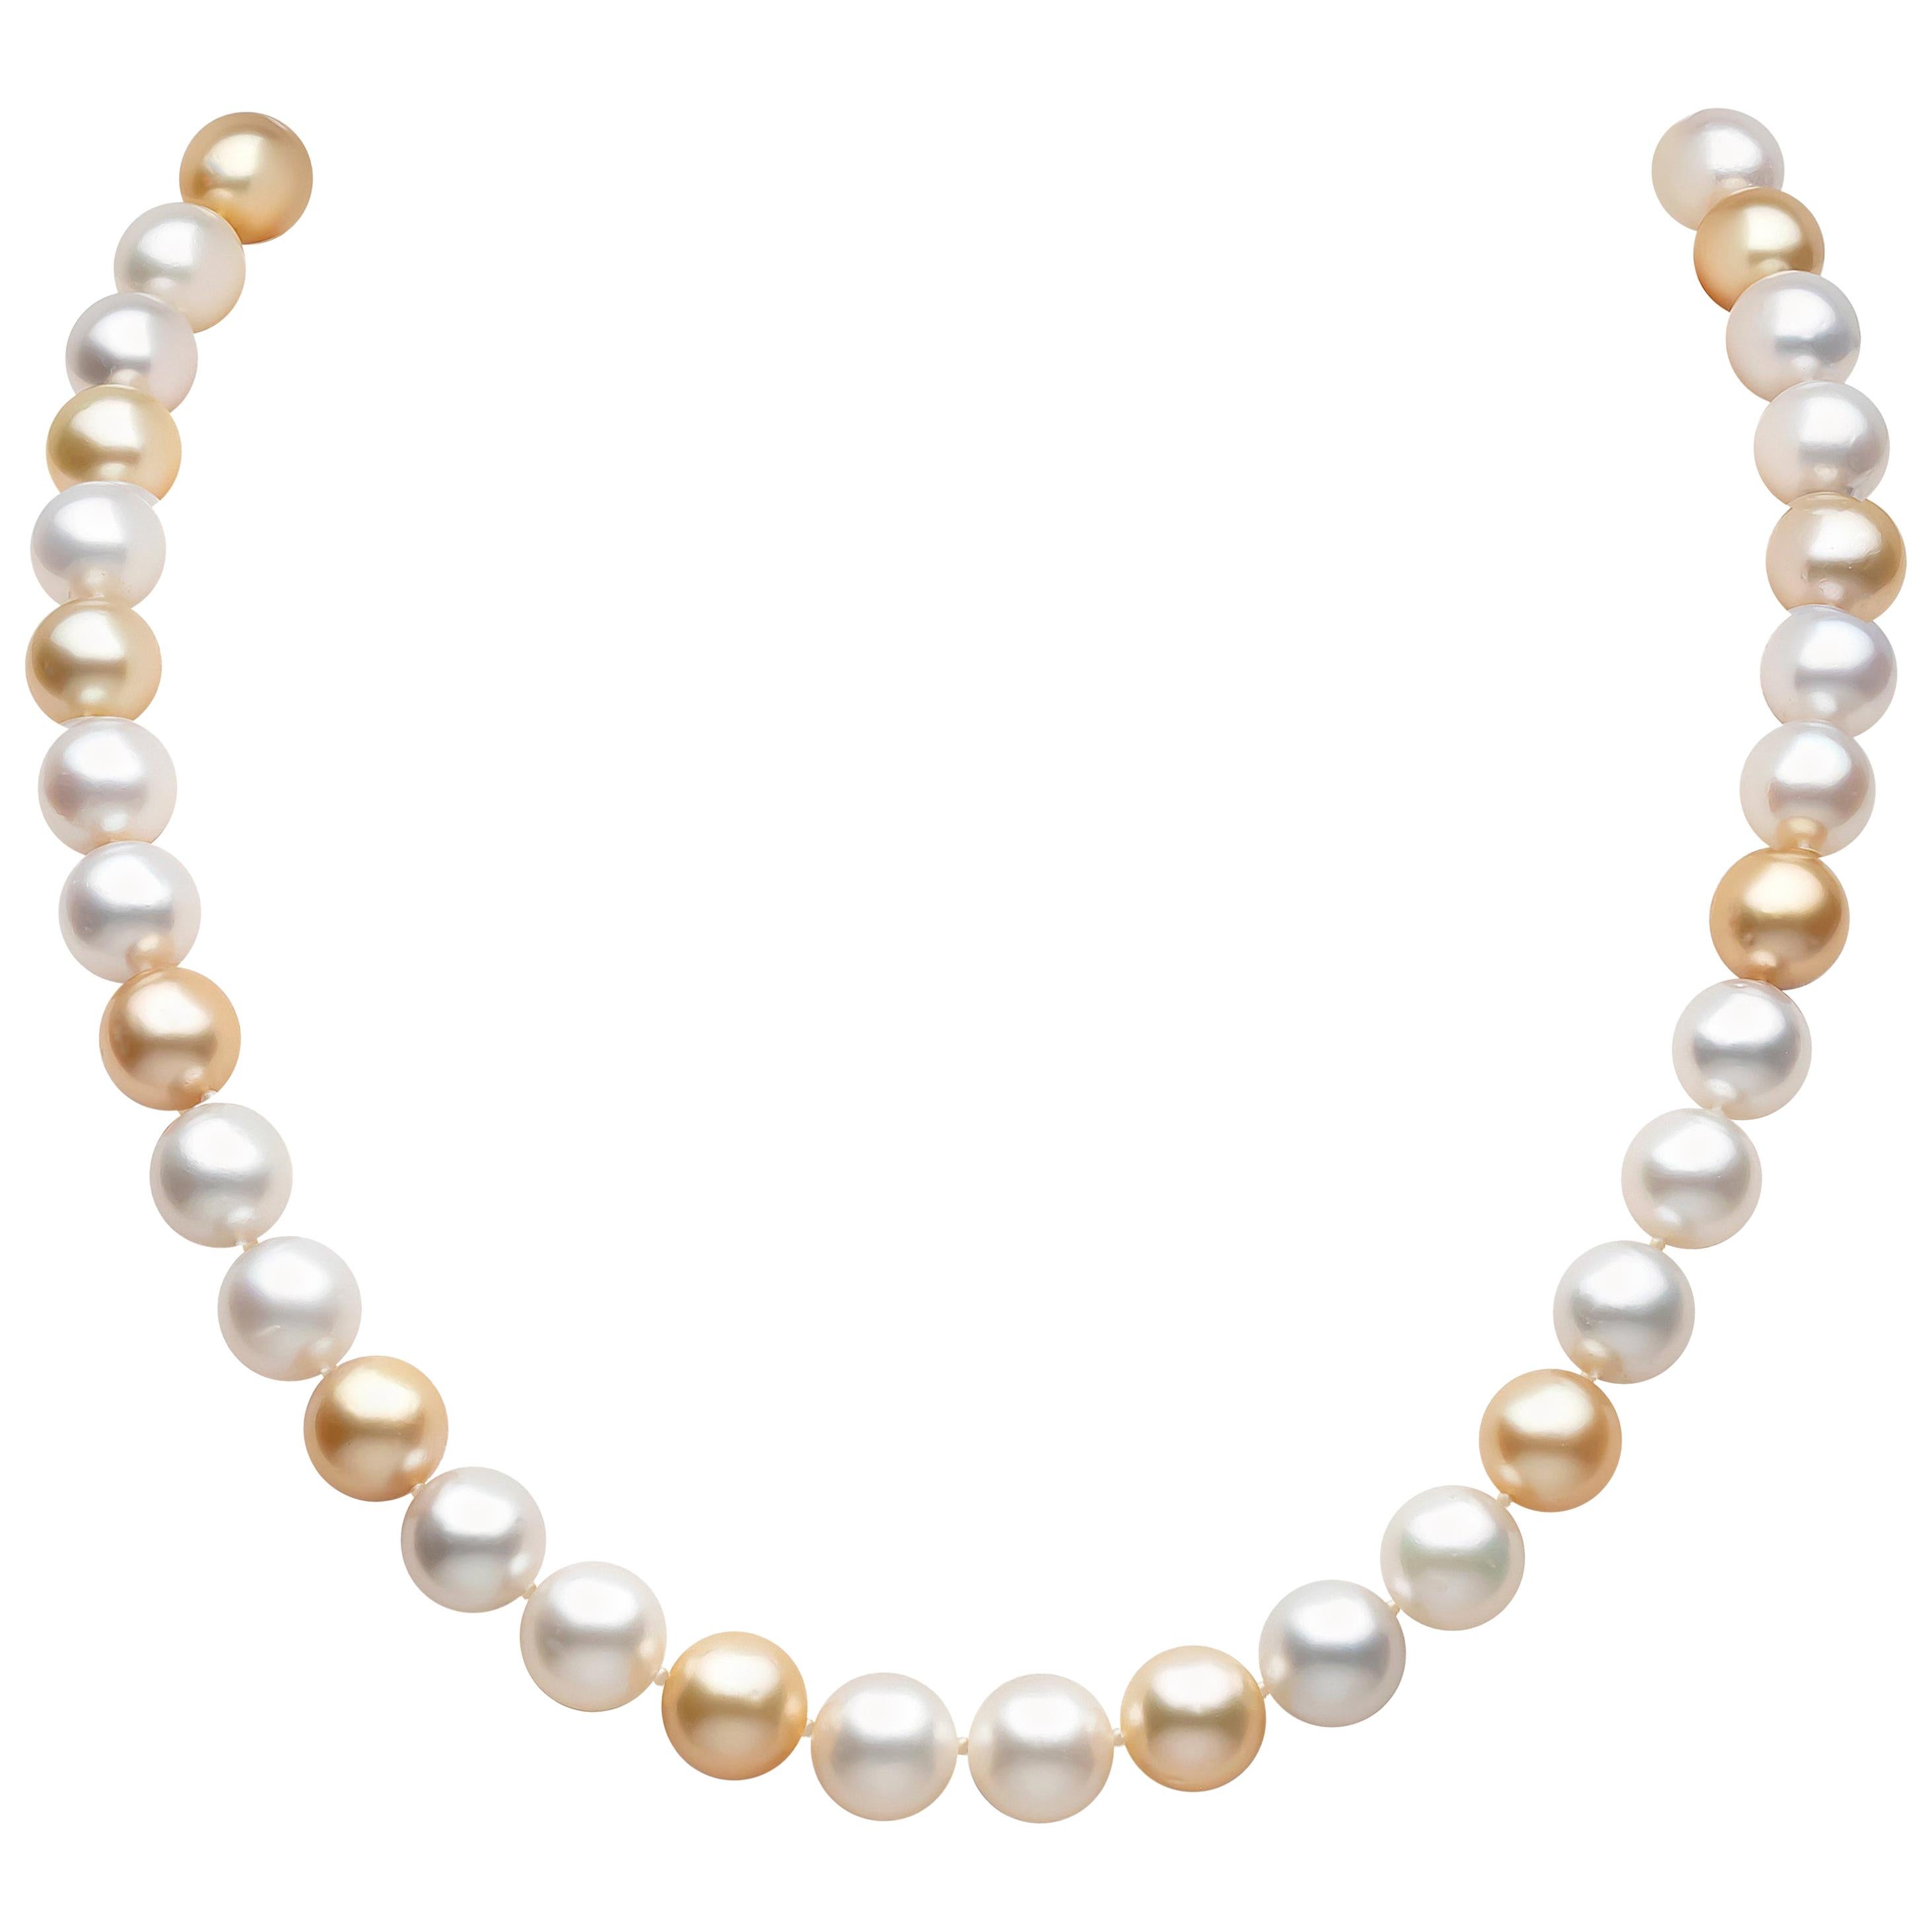 Yoko London White and Golden South Sea Pearl Necklace in 18 Karat Yellow Gold